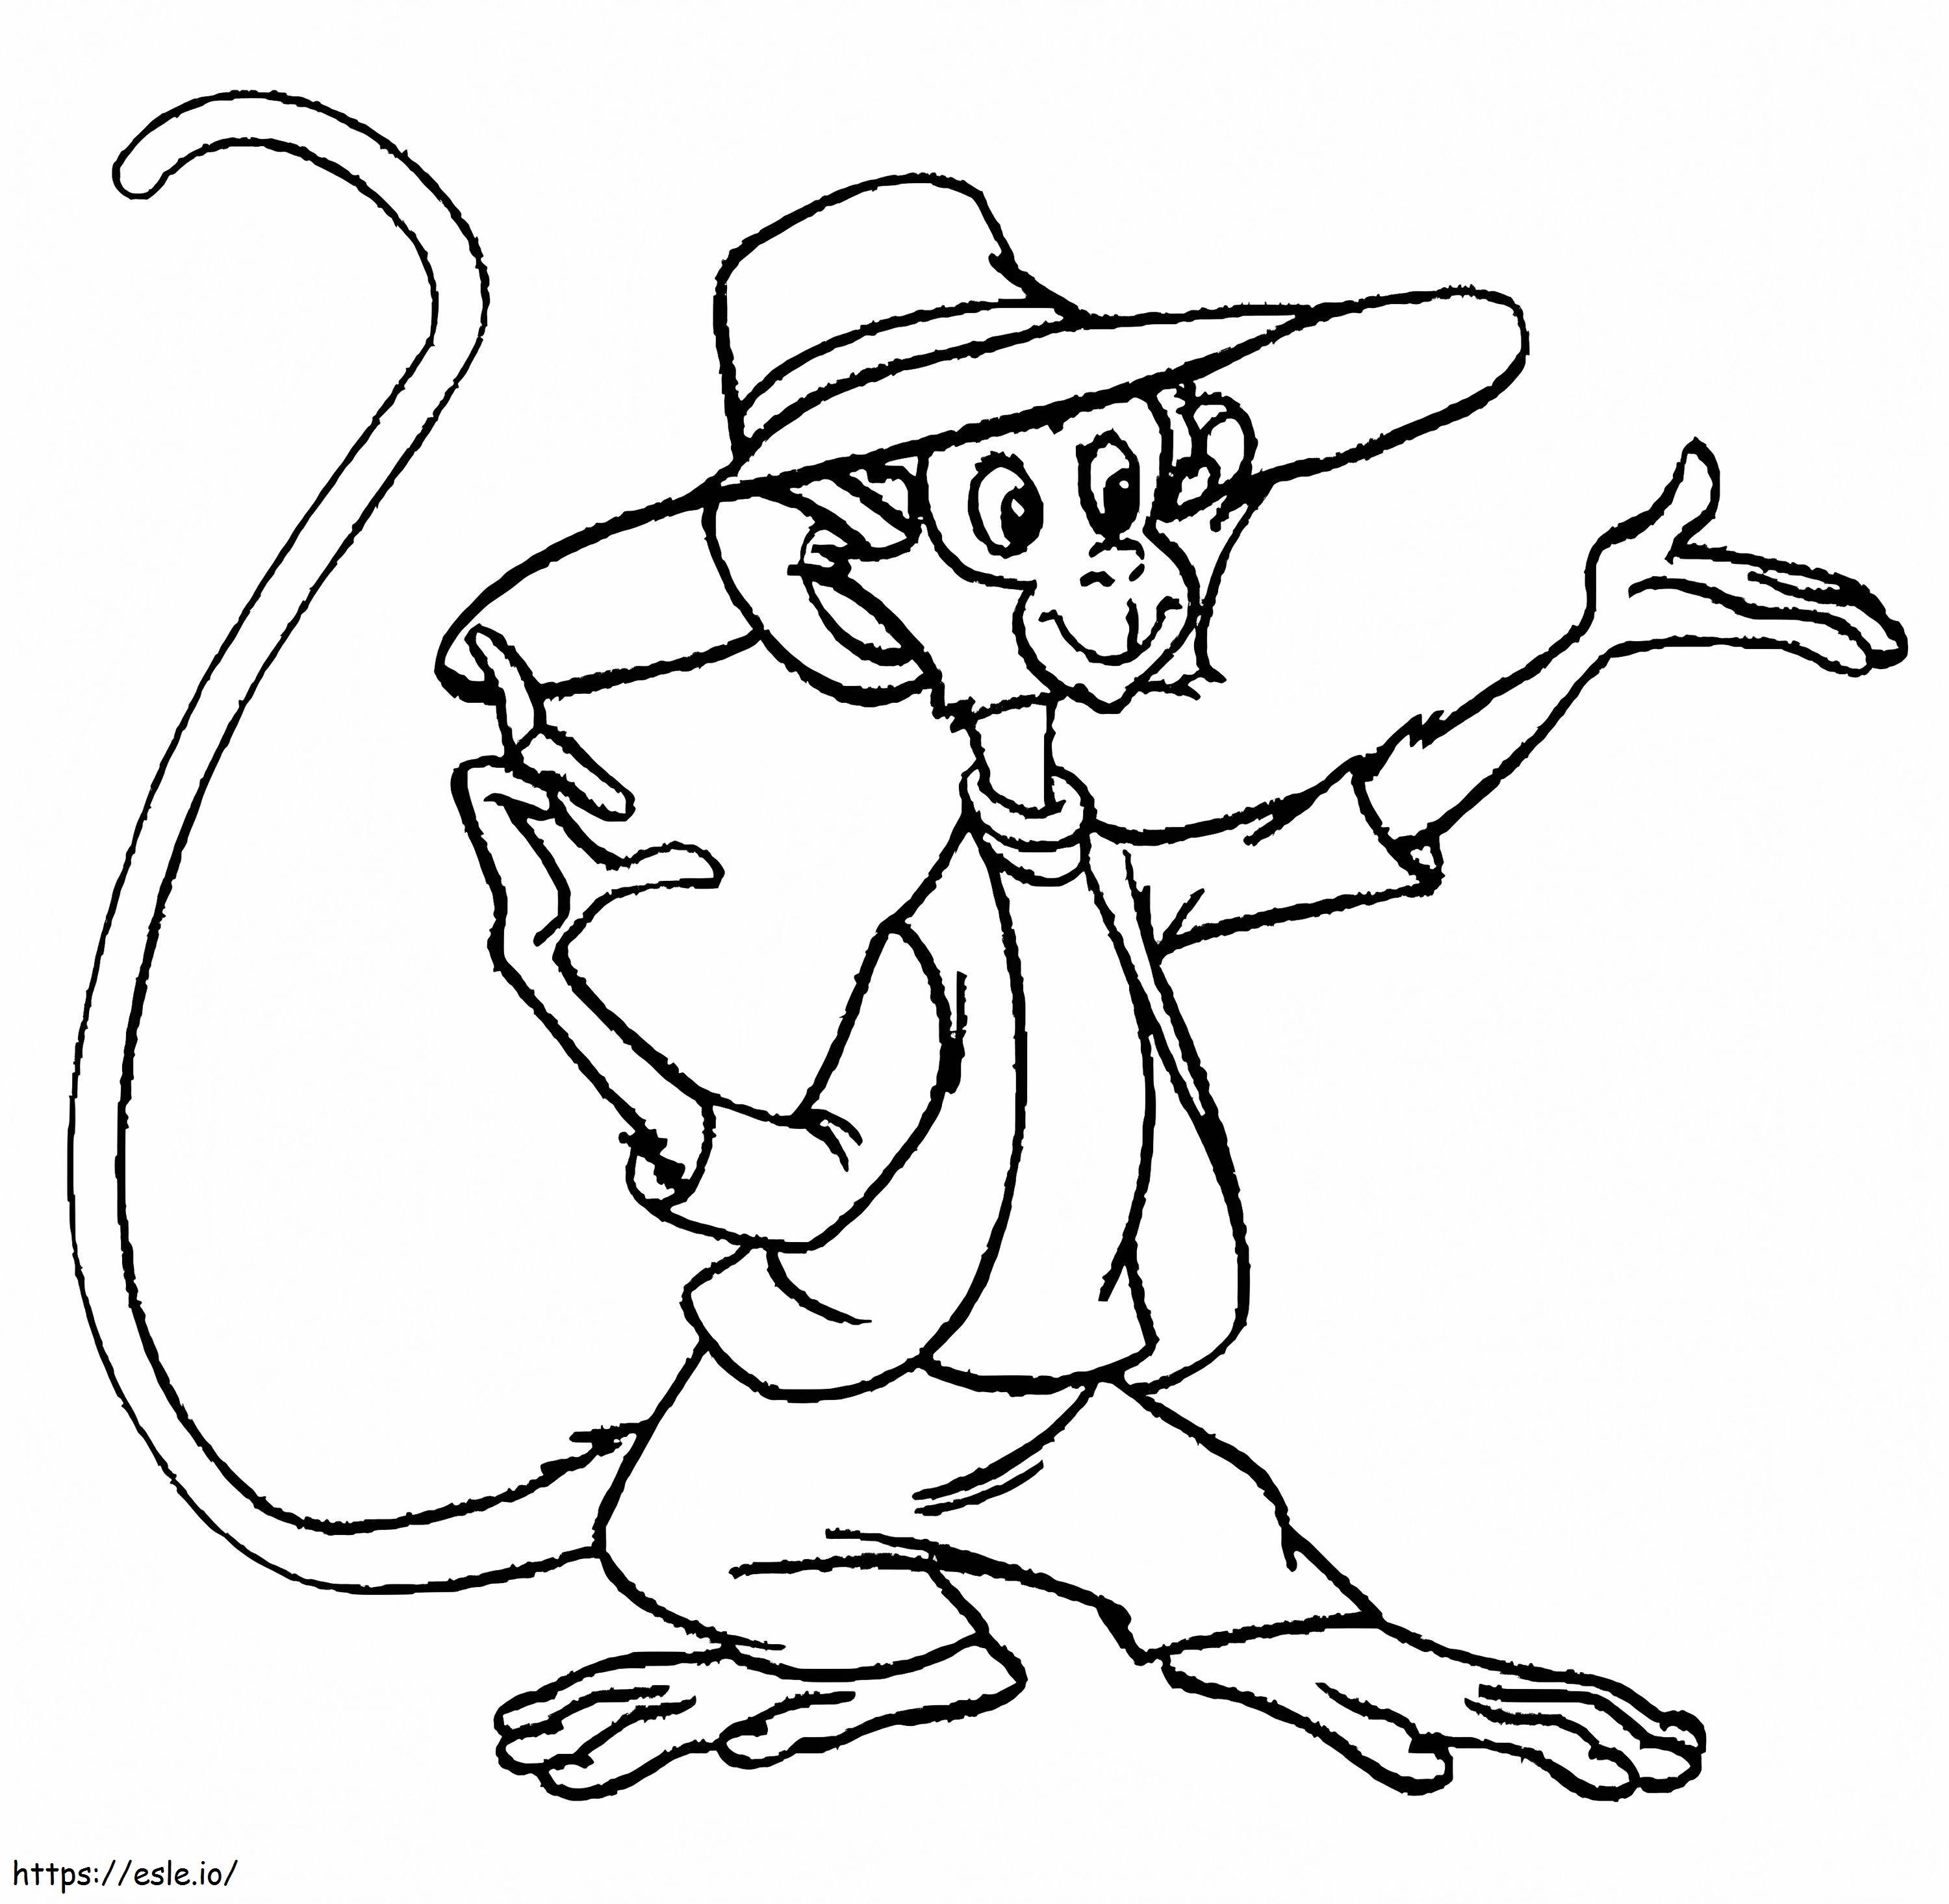 Mr Nilsson coloring page